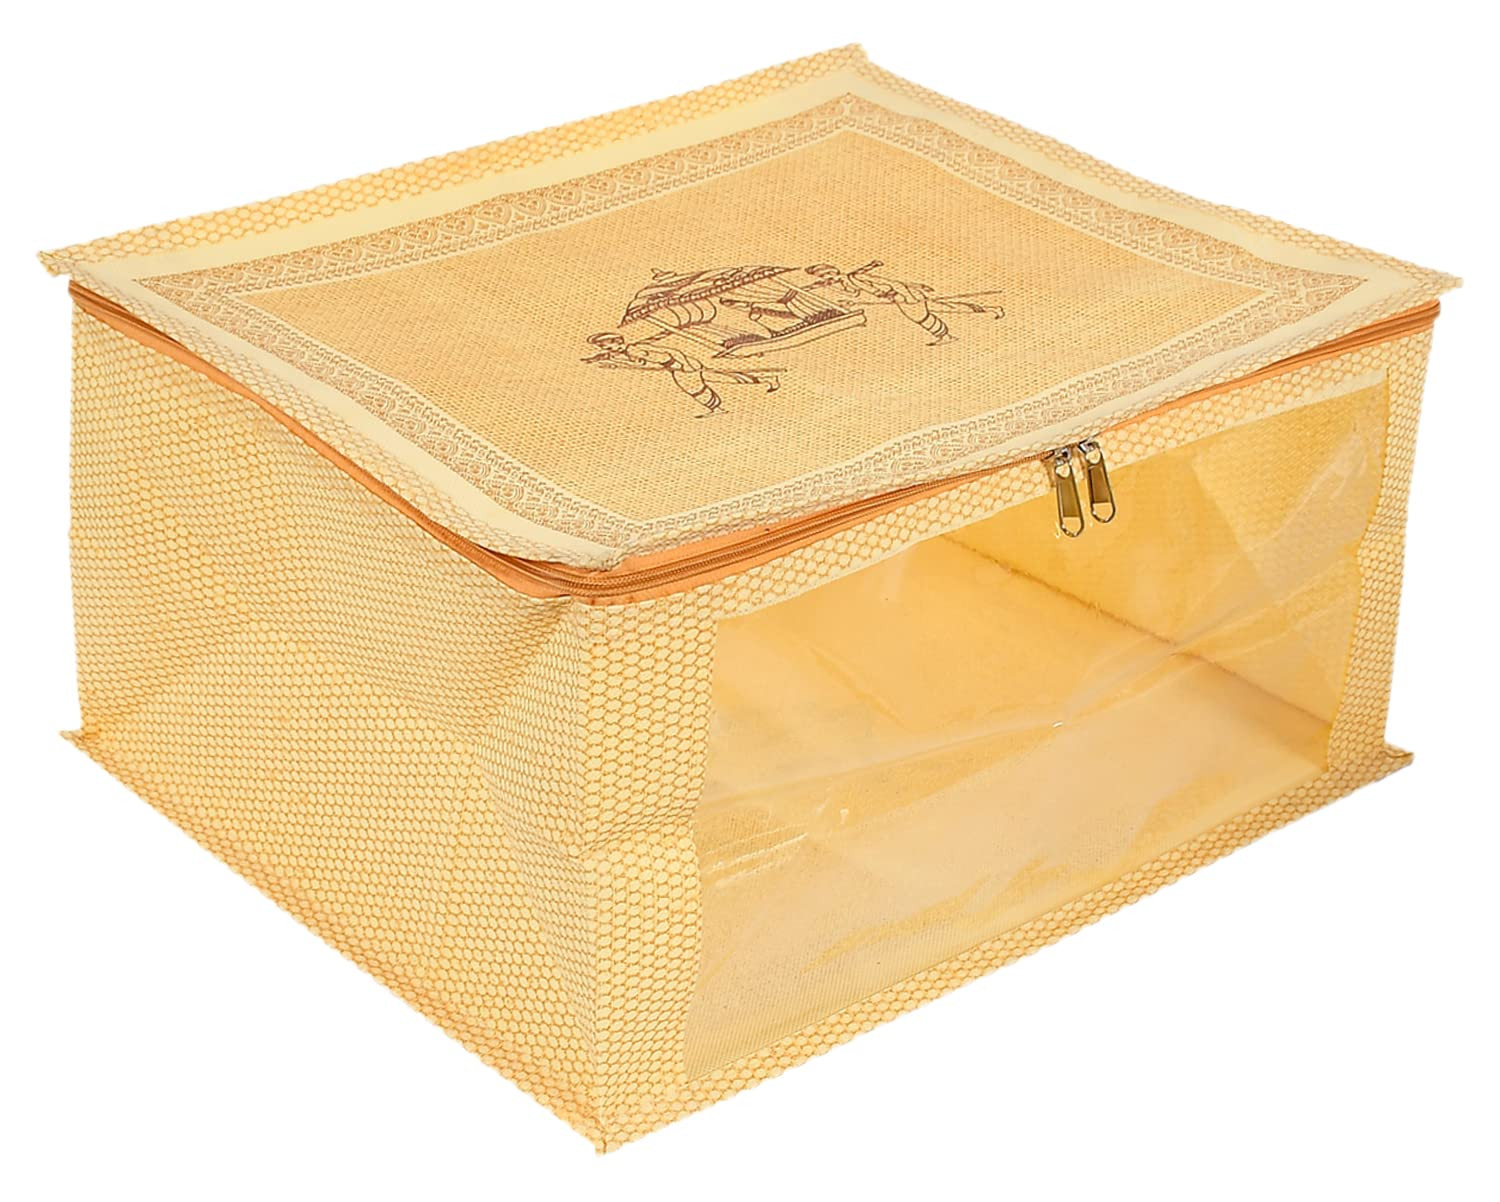 Kuber Industries Doli Printed Non-woven Foldable Saree Cover/Clothes Storage Bag/Wardrobe Organizer With Transparent Window (Gold) 54KM4173